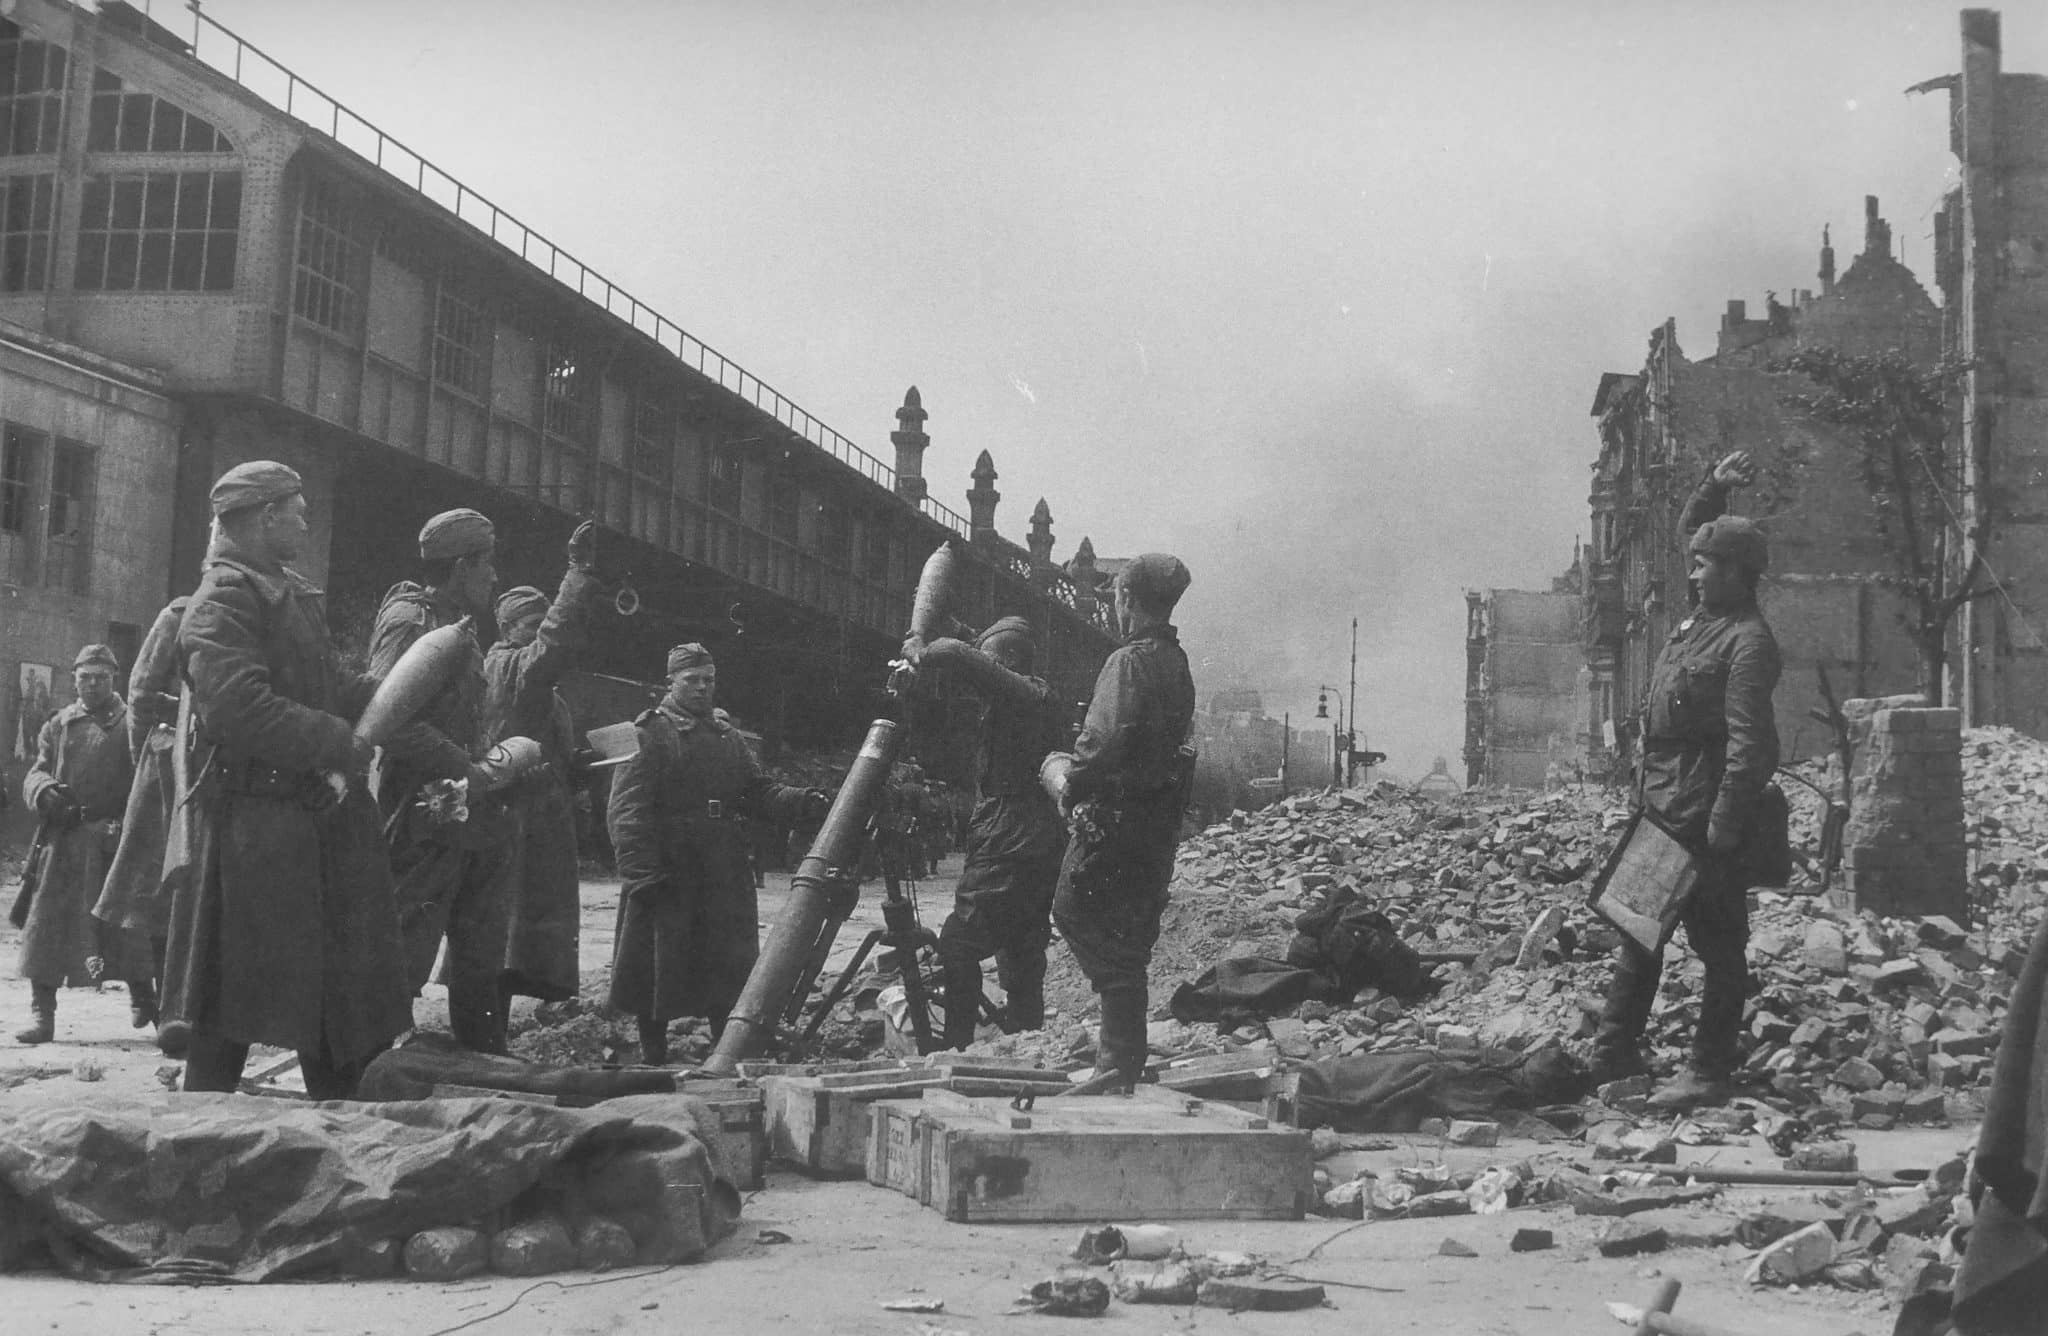 The calculation of the Soviet mortar PM-43 fires at the metro station Bulowstrasse in Berlin